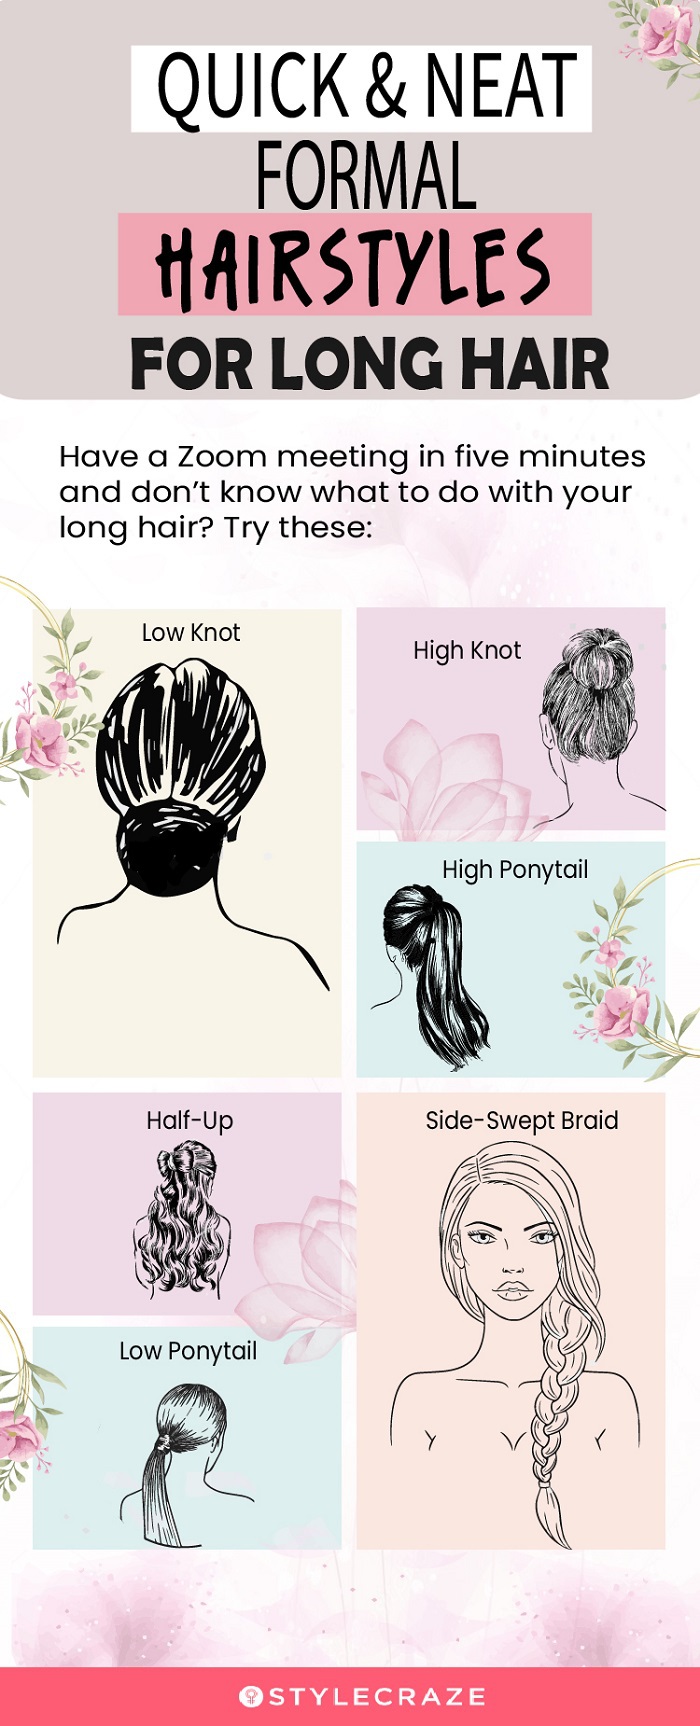 quick and neat formal hairstyles for long hair [infographic]